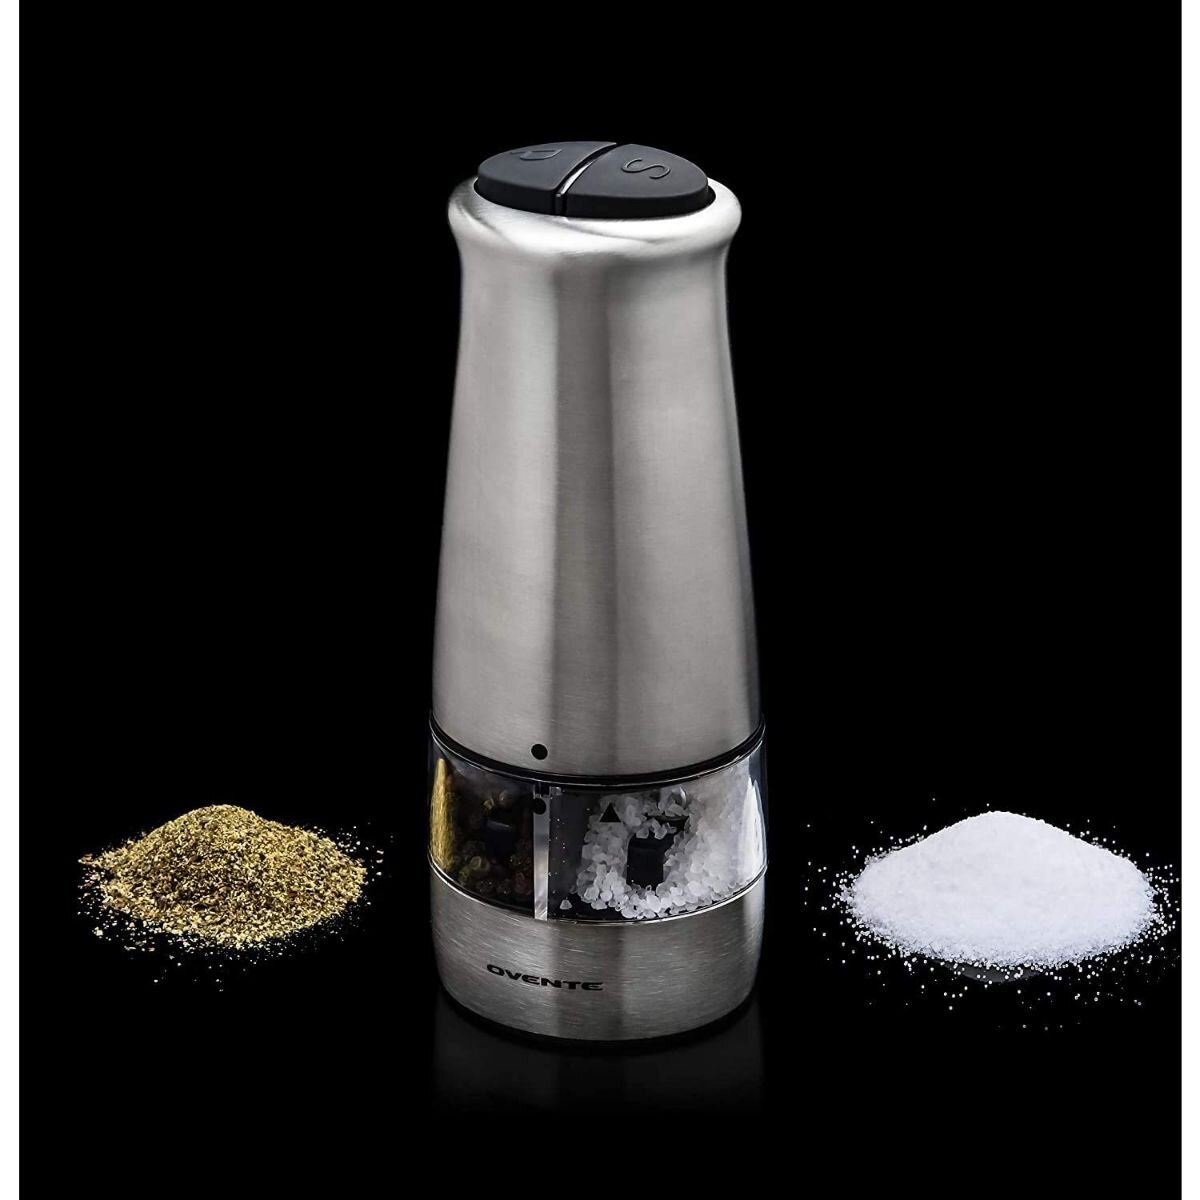 OVENTE Stainless Steel with Ceramic Blades Electric Salt and